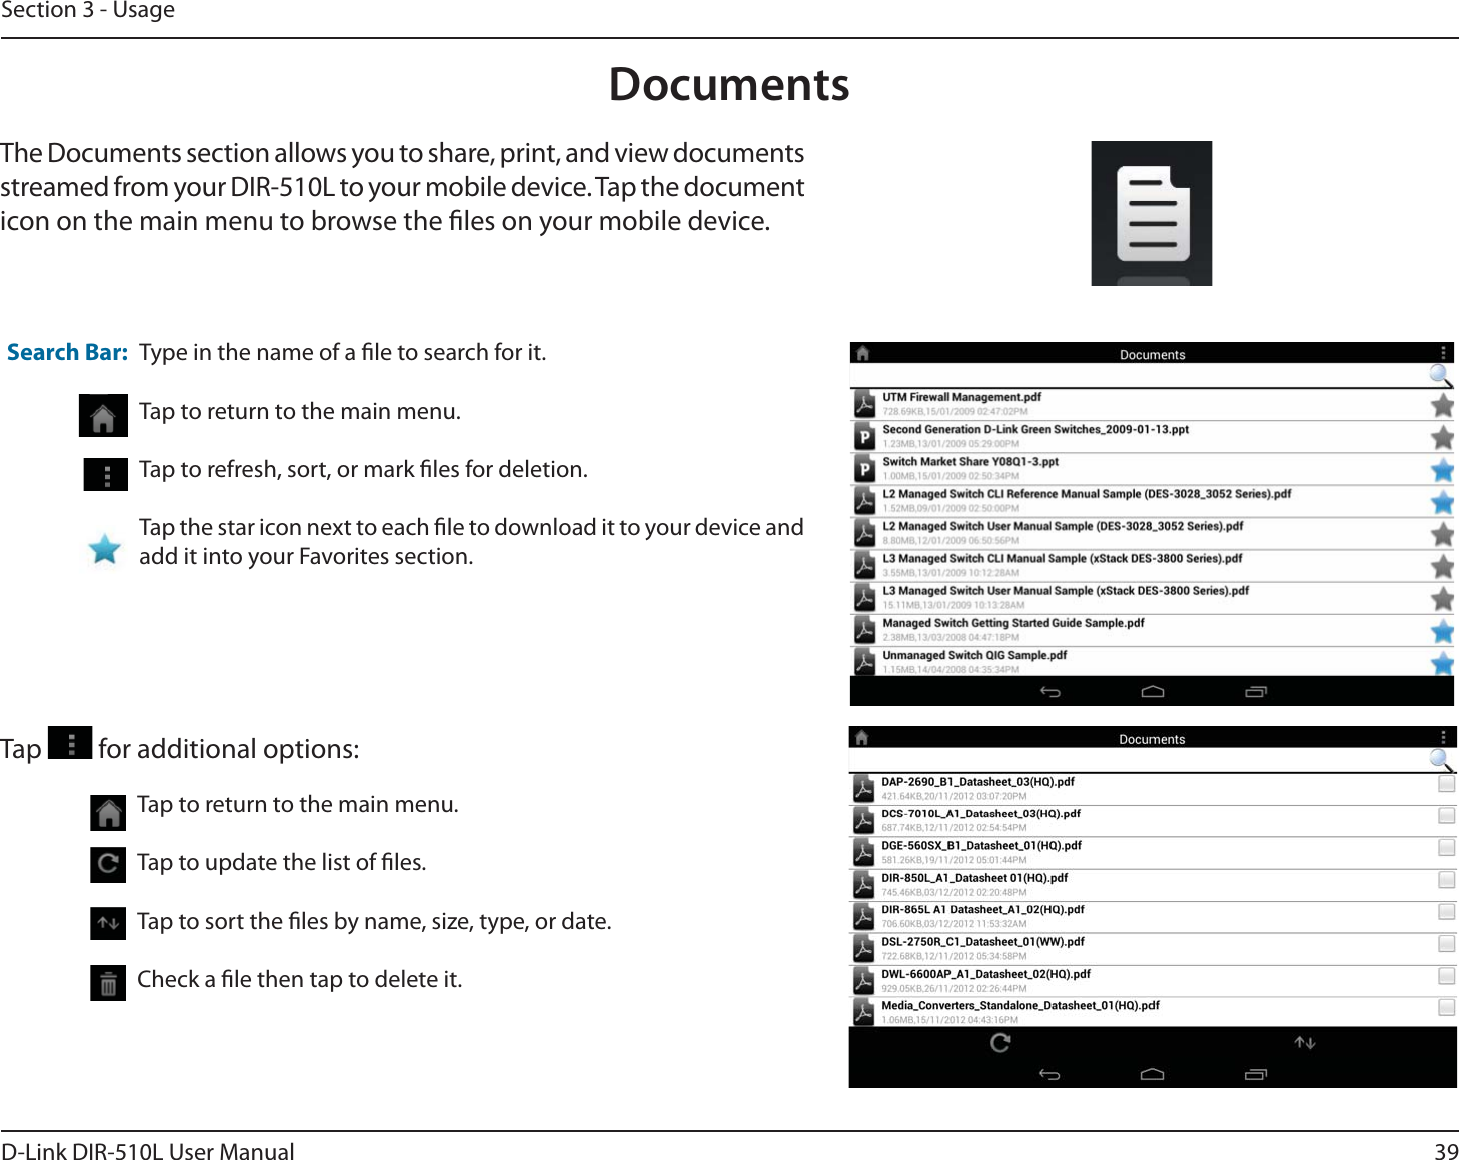 39D-Link DIR-510L User ManualSection 3 - UsageDocumentsThe Documents section allows you to share, print, and view documents streamed from your DIR-510L to your mobile device. Tap the document icon on the main menu to browse the les on your mobile device.Type in the name of a le to search for it.Tap to return to the main menu.Tap to refresh, sort, or mark les for deletion.Tap the star icon next to each le to download it to your device and add it into your Favorites section.Search Bar:Tap   for additional options:Tap to return to the main menu.Tap to update the list of les.Tap to sort the les by name, size, type, or date.Check a le then tap to delete it.